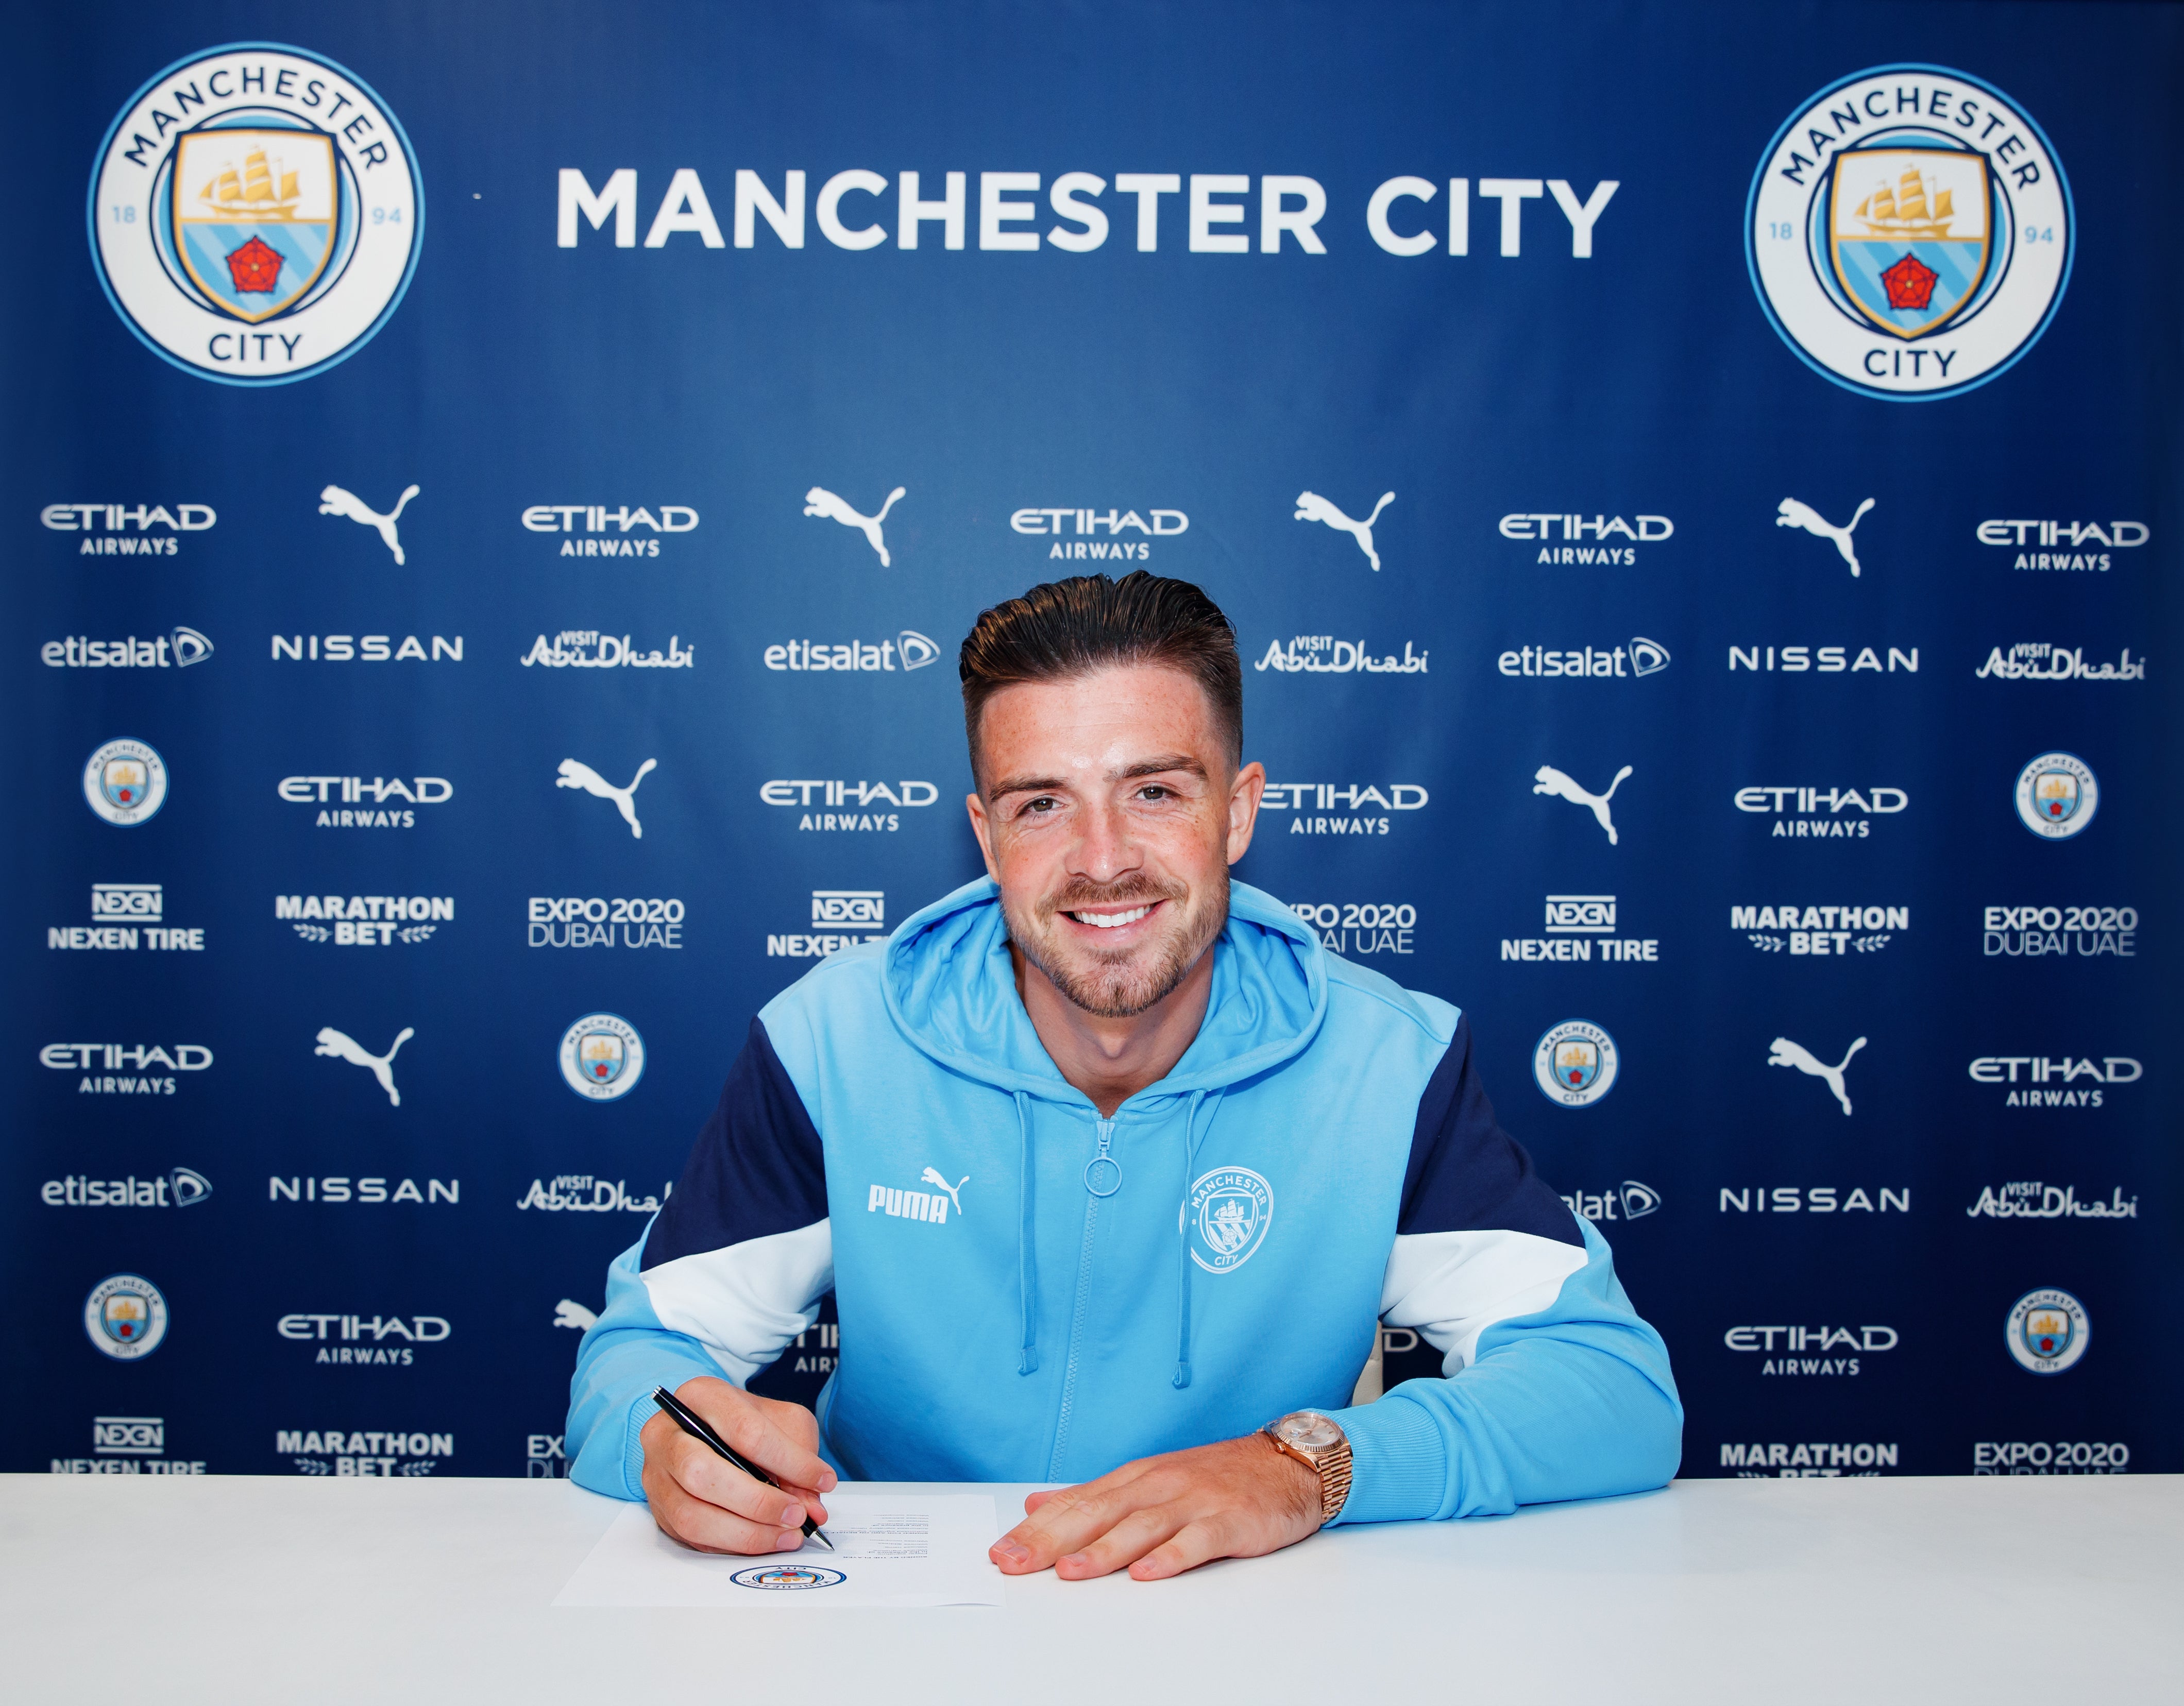 Manchester City unveil new signing Jack Grealish at Manchester City Football Academy